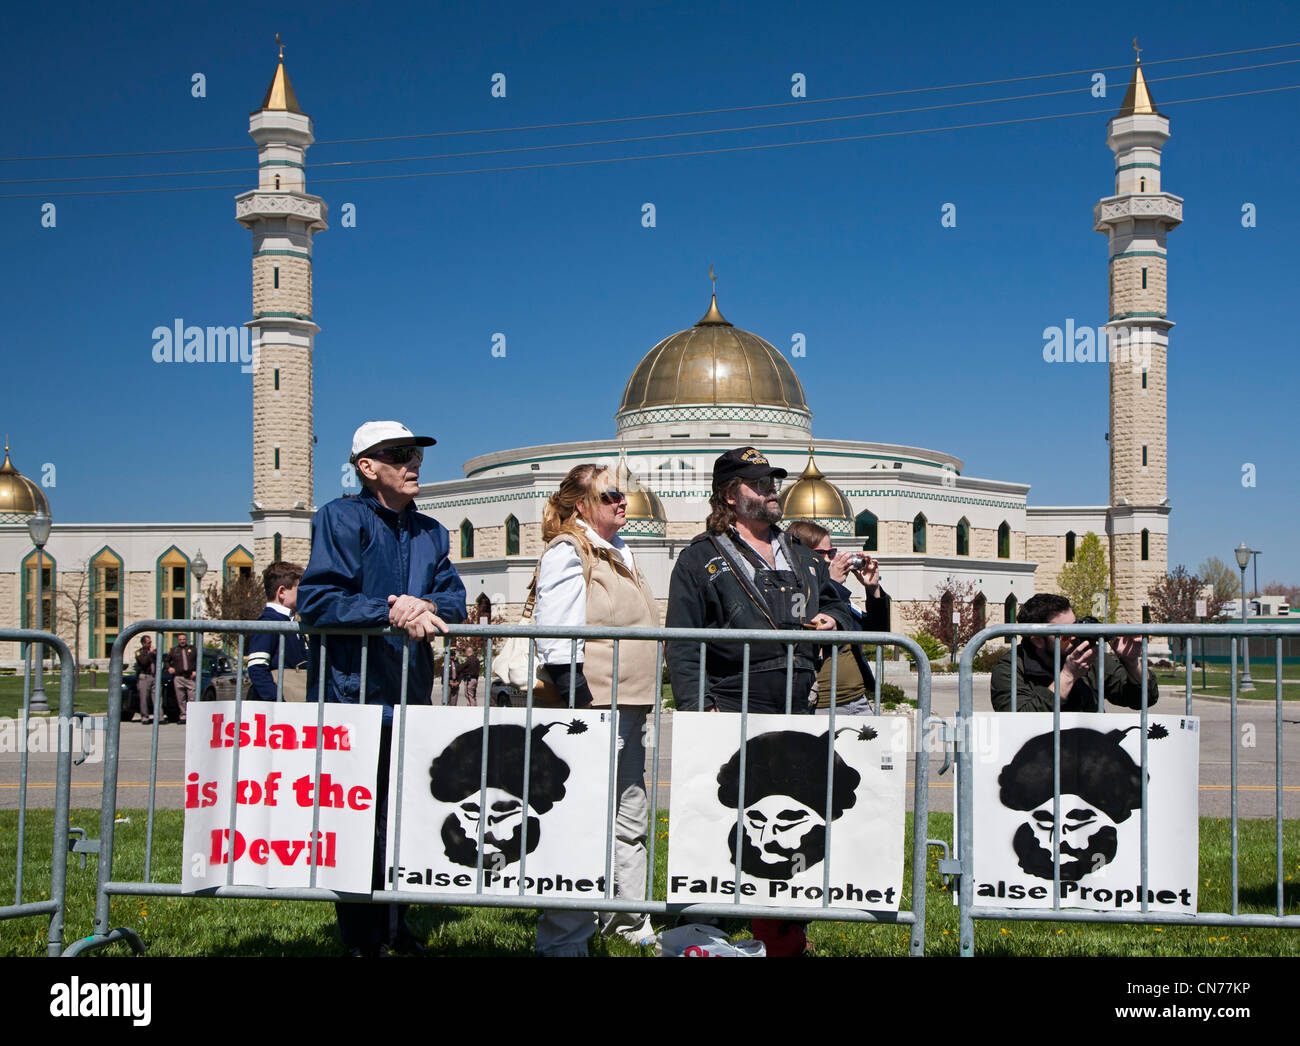 Dearborn, Michigan - Followers of Florida pastor Terry Jones at a rally against Islam in front of the Islamic Center of America. Stock Photo